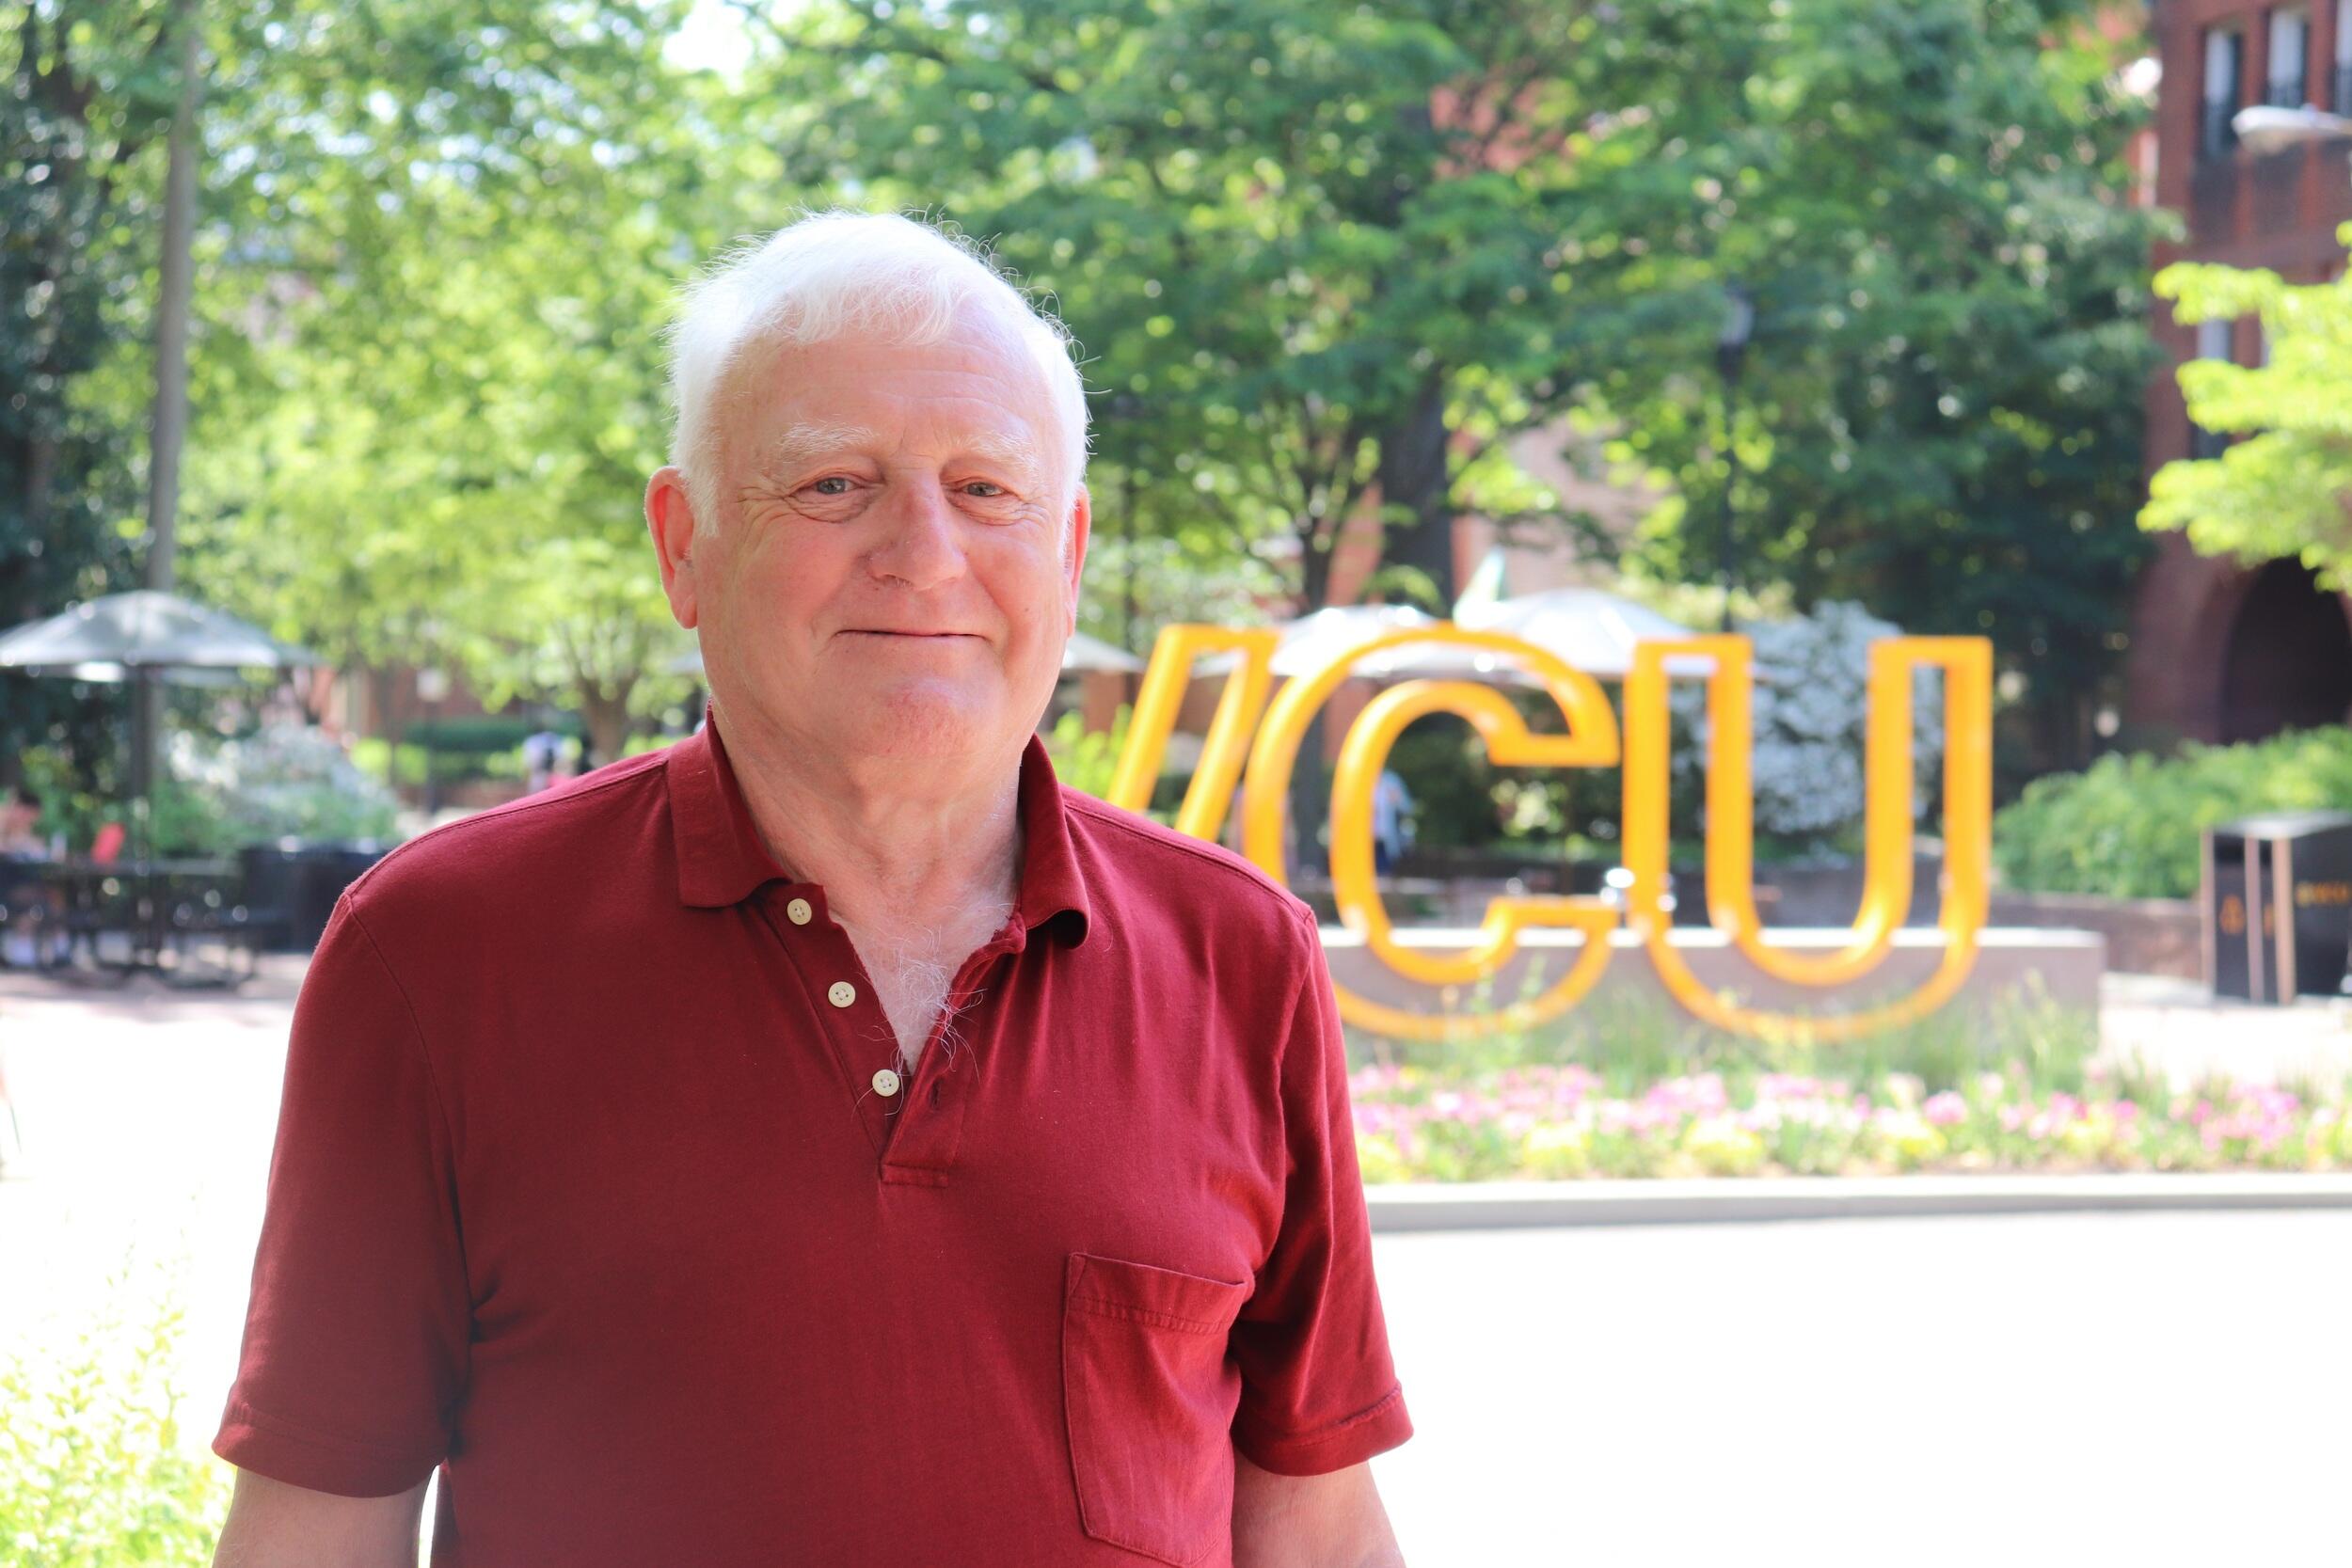 A portrait of a man from the chest up standing outside in front of a sign that says \"VCU\"